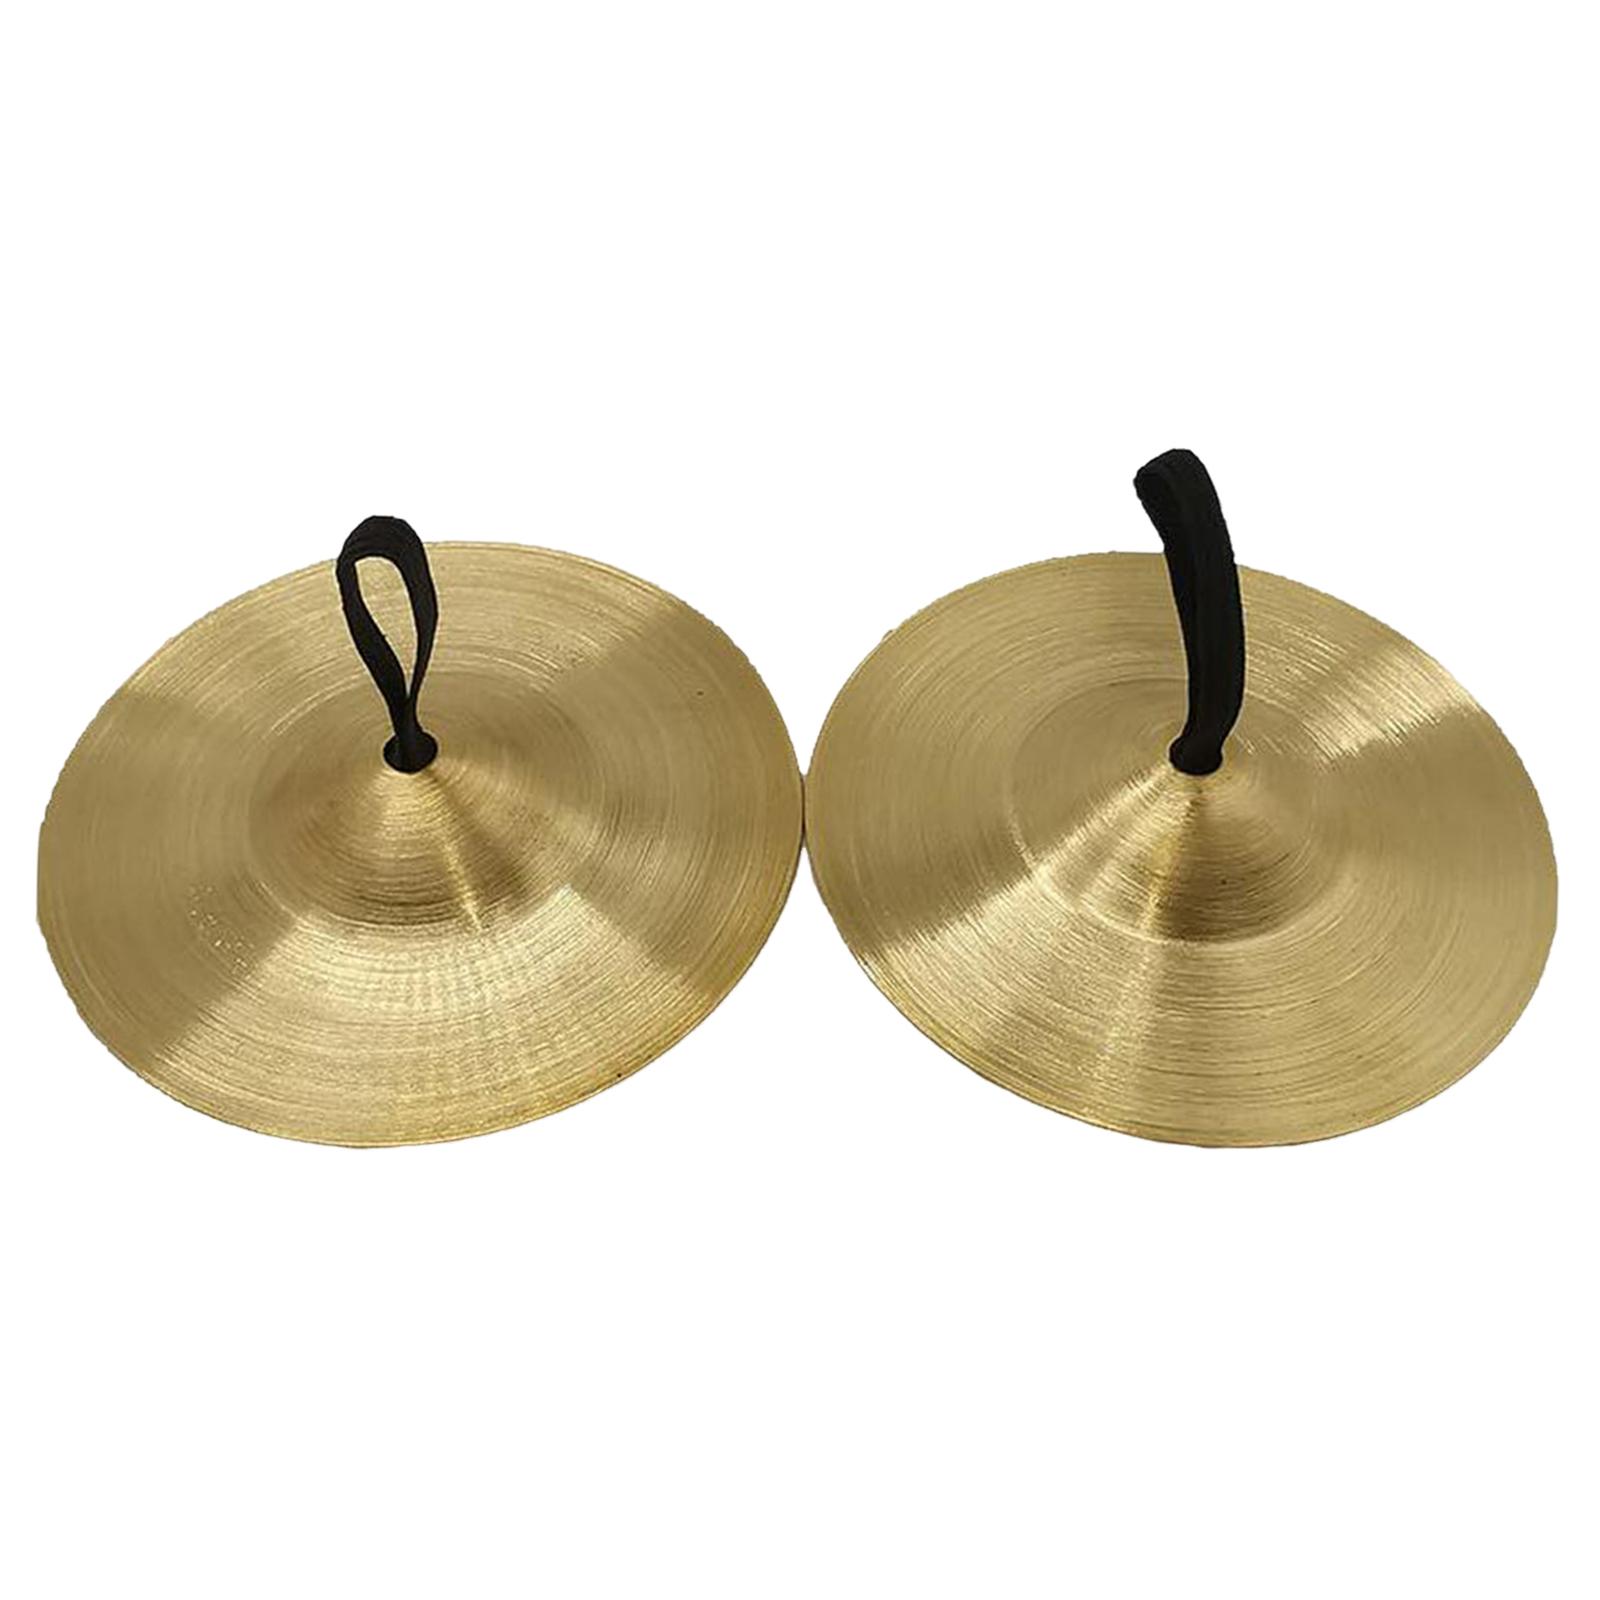 Hand Cymbals Kids Handheld Cymbals Musical Instrument copper Crash Cymbal for Kids ,Finger Cymbals for Activity, Events, Chorus, Presentations 9cm - image 5 of 8